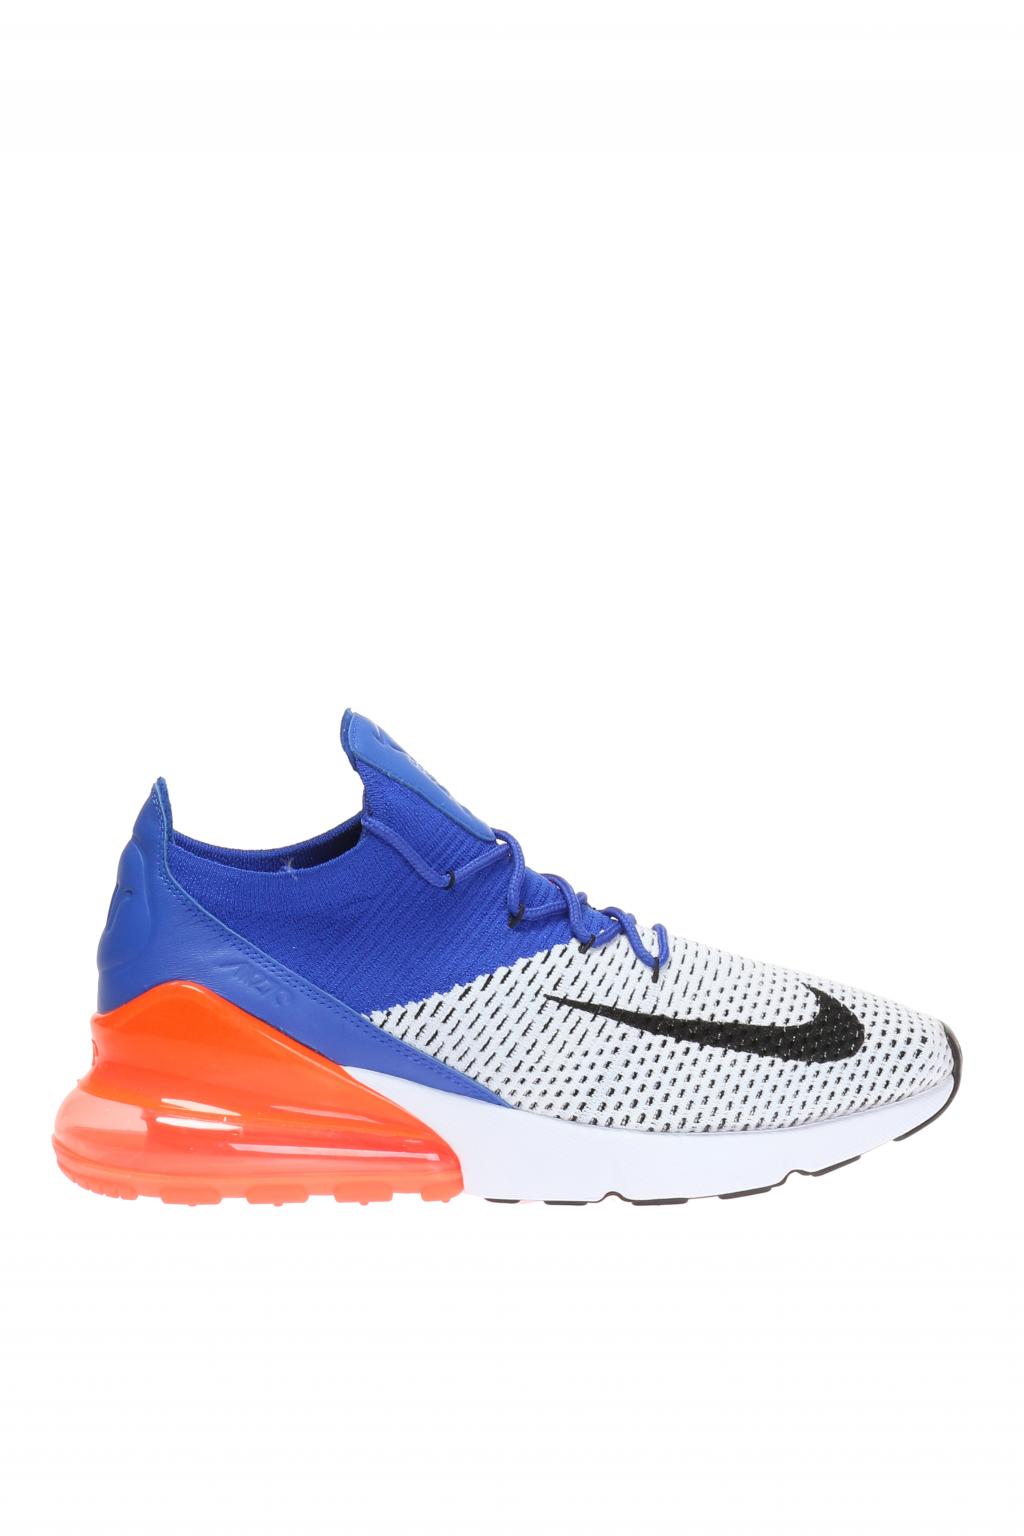 nike air max 270 flyknit shoes